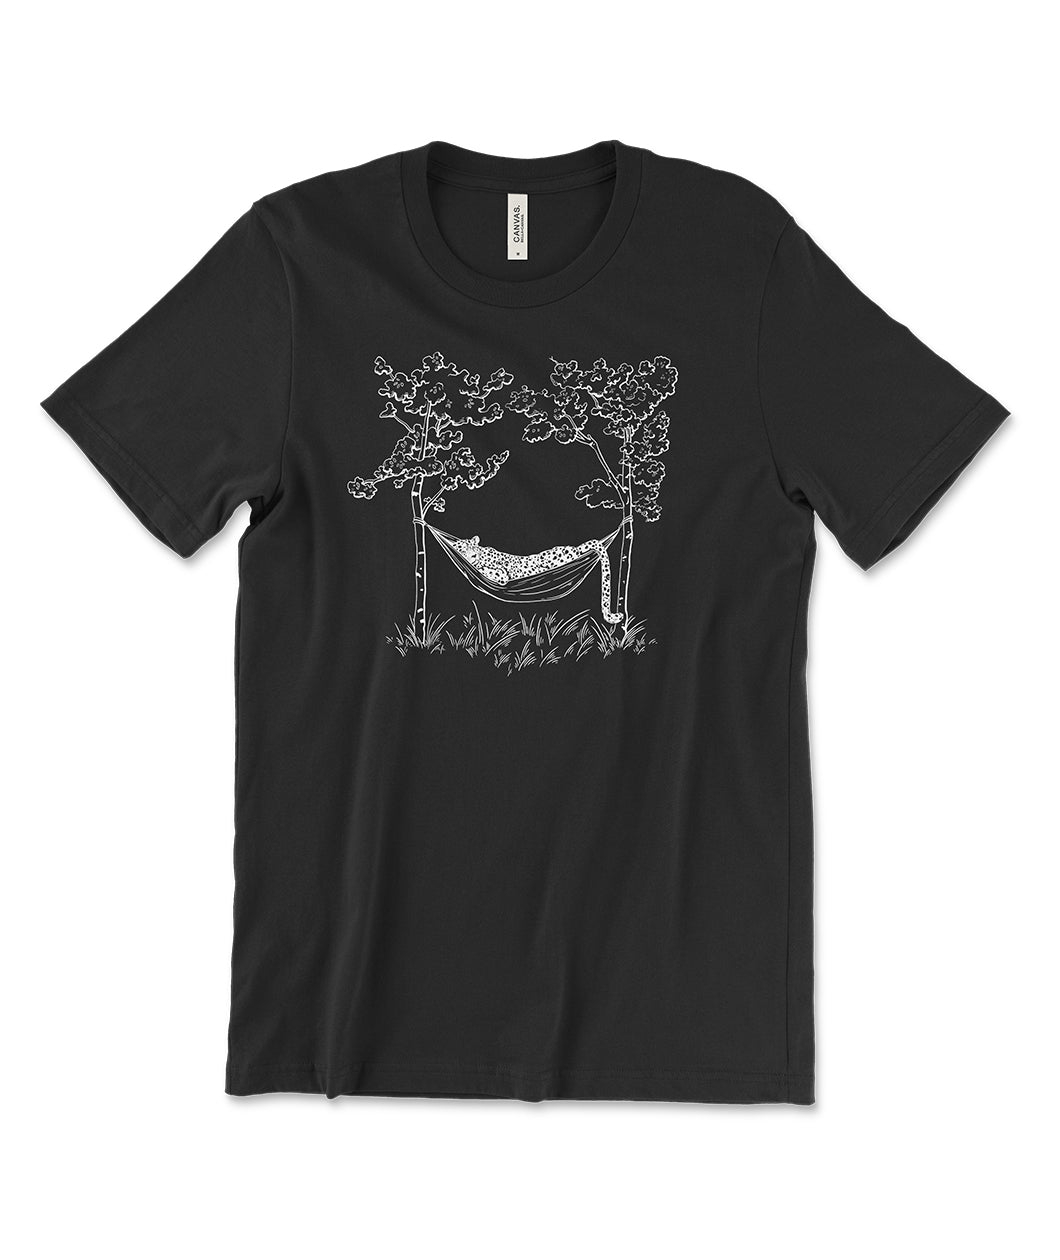 A black t-shirt with a white illustration of a leopard relaxing in a hammock between two trees. From Courtney Dauwalter. 